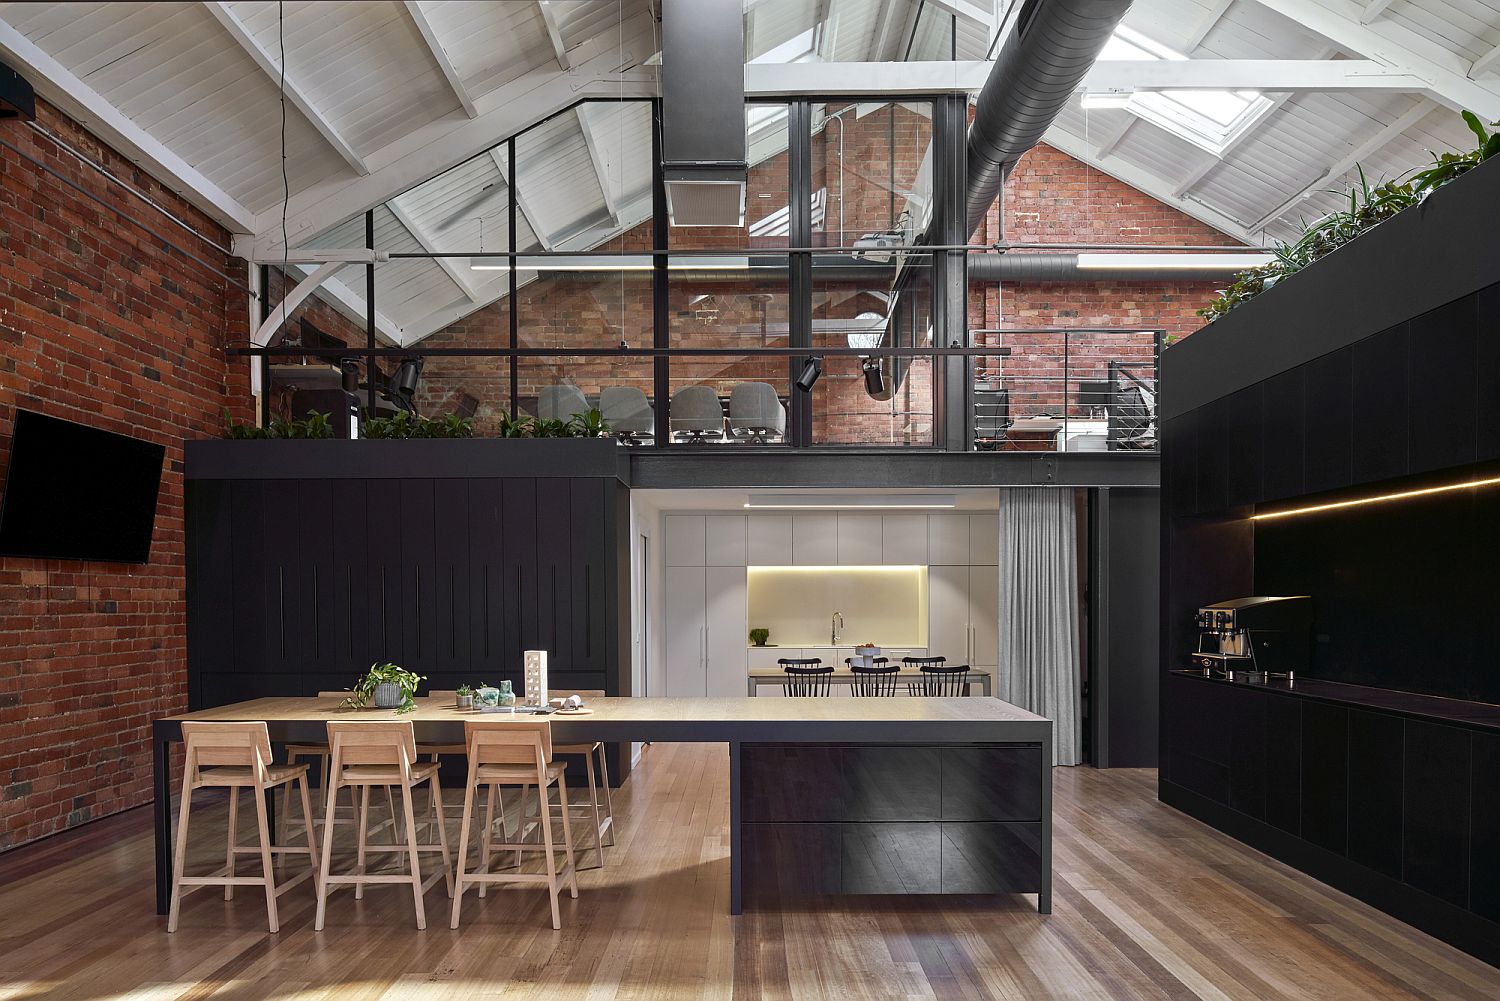 Wood-brick-and-polished-modern-surfaces-find-space-here